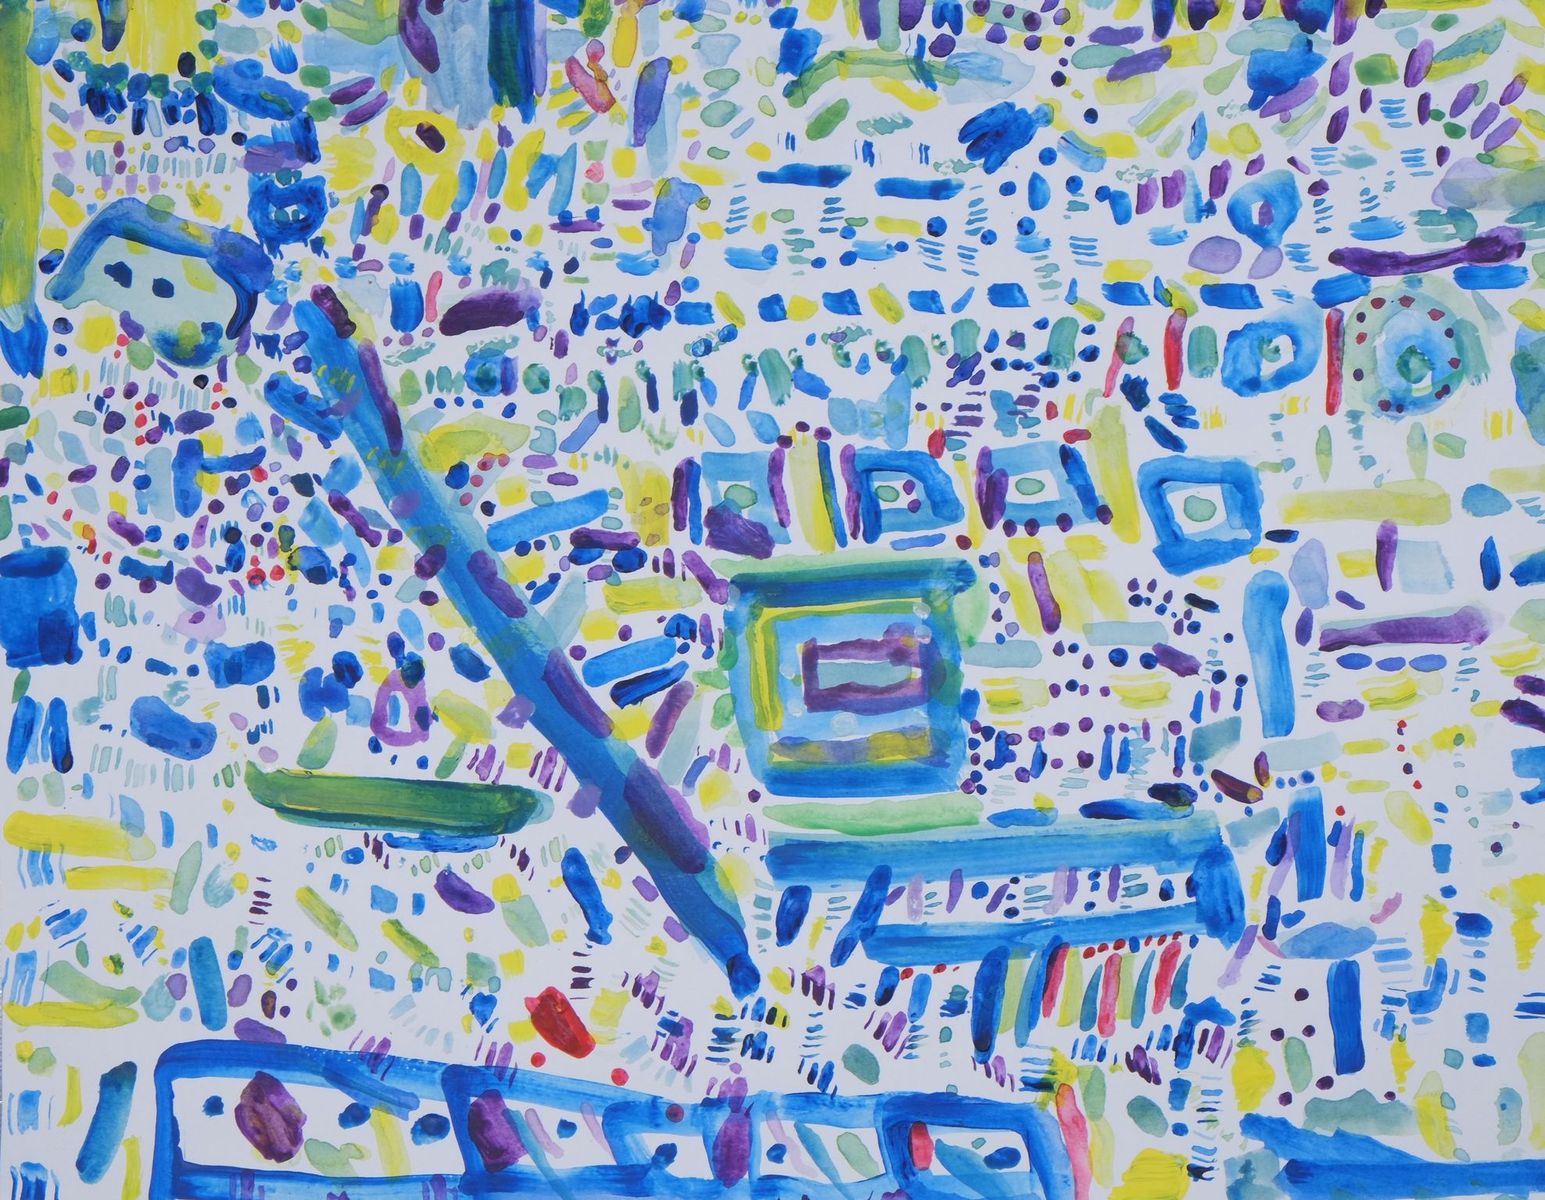 Acrylic on paper artwork with a mostly white background with patterns and shapes of dots, streaks, lines, squares in purple, yellow and blue colors with green accents throughout